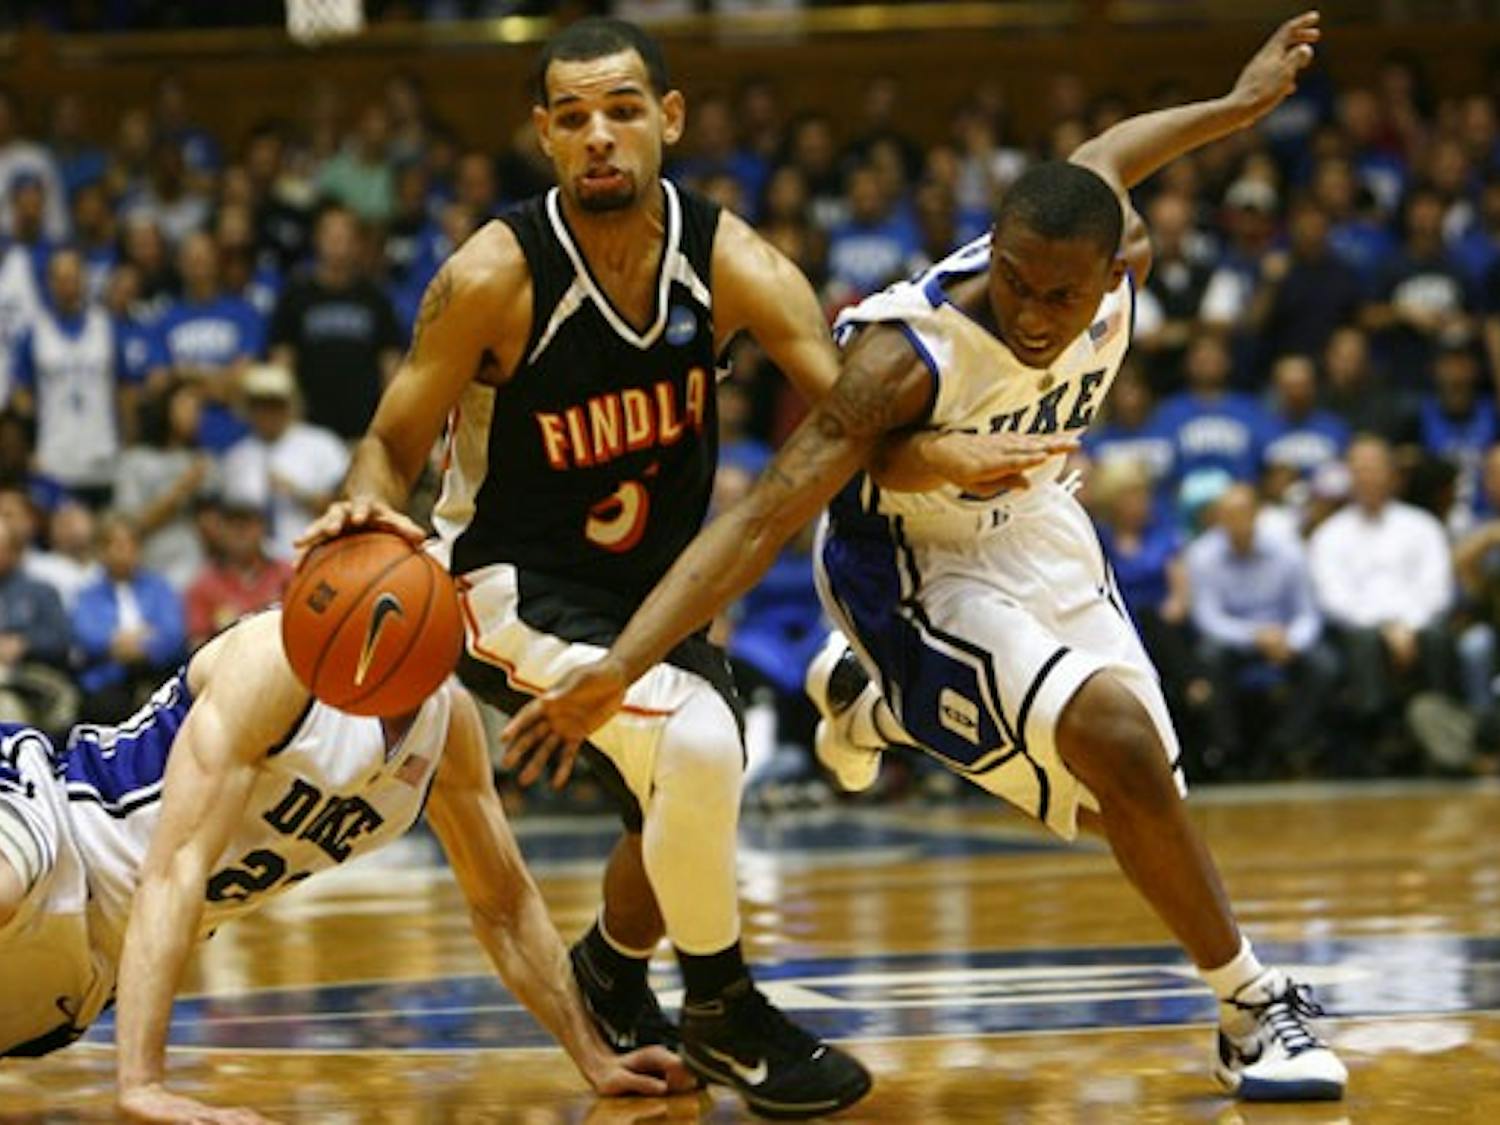 Junior Nolan Smith played only in the second half of Duke’s easy victory over Findlay Tuesday night.